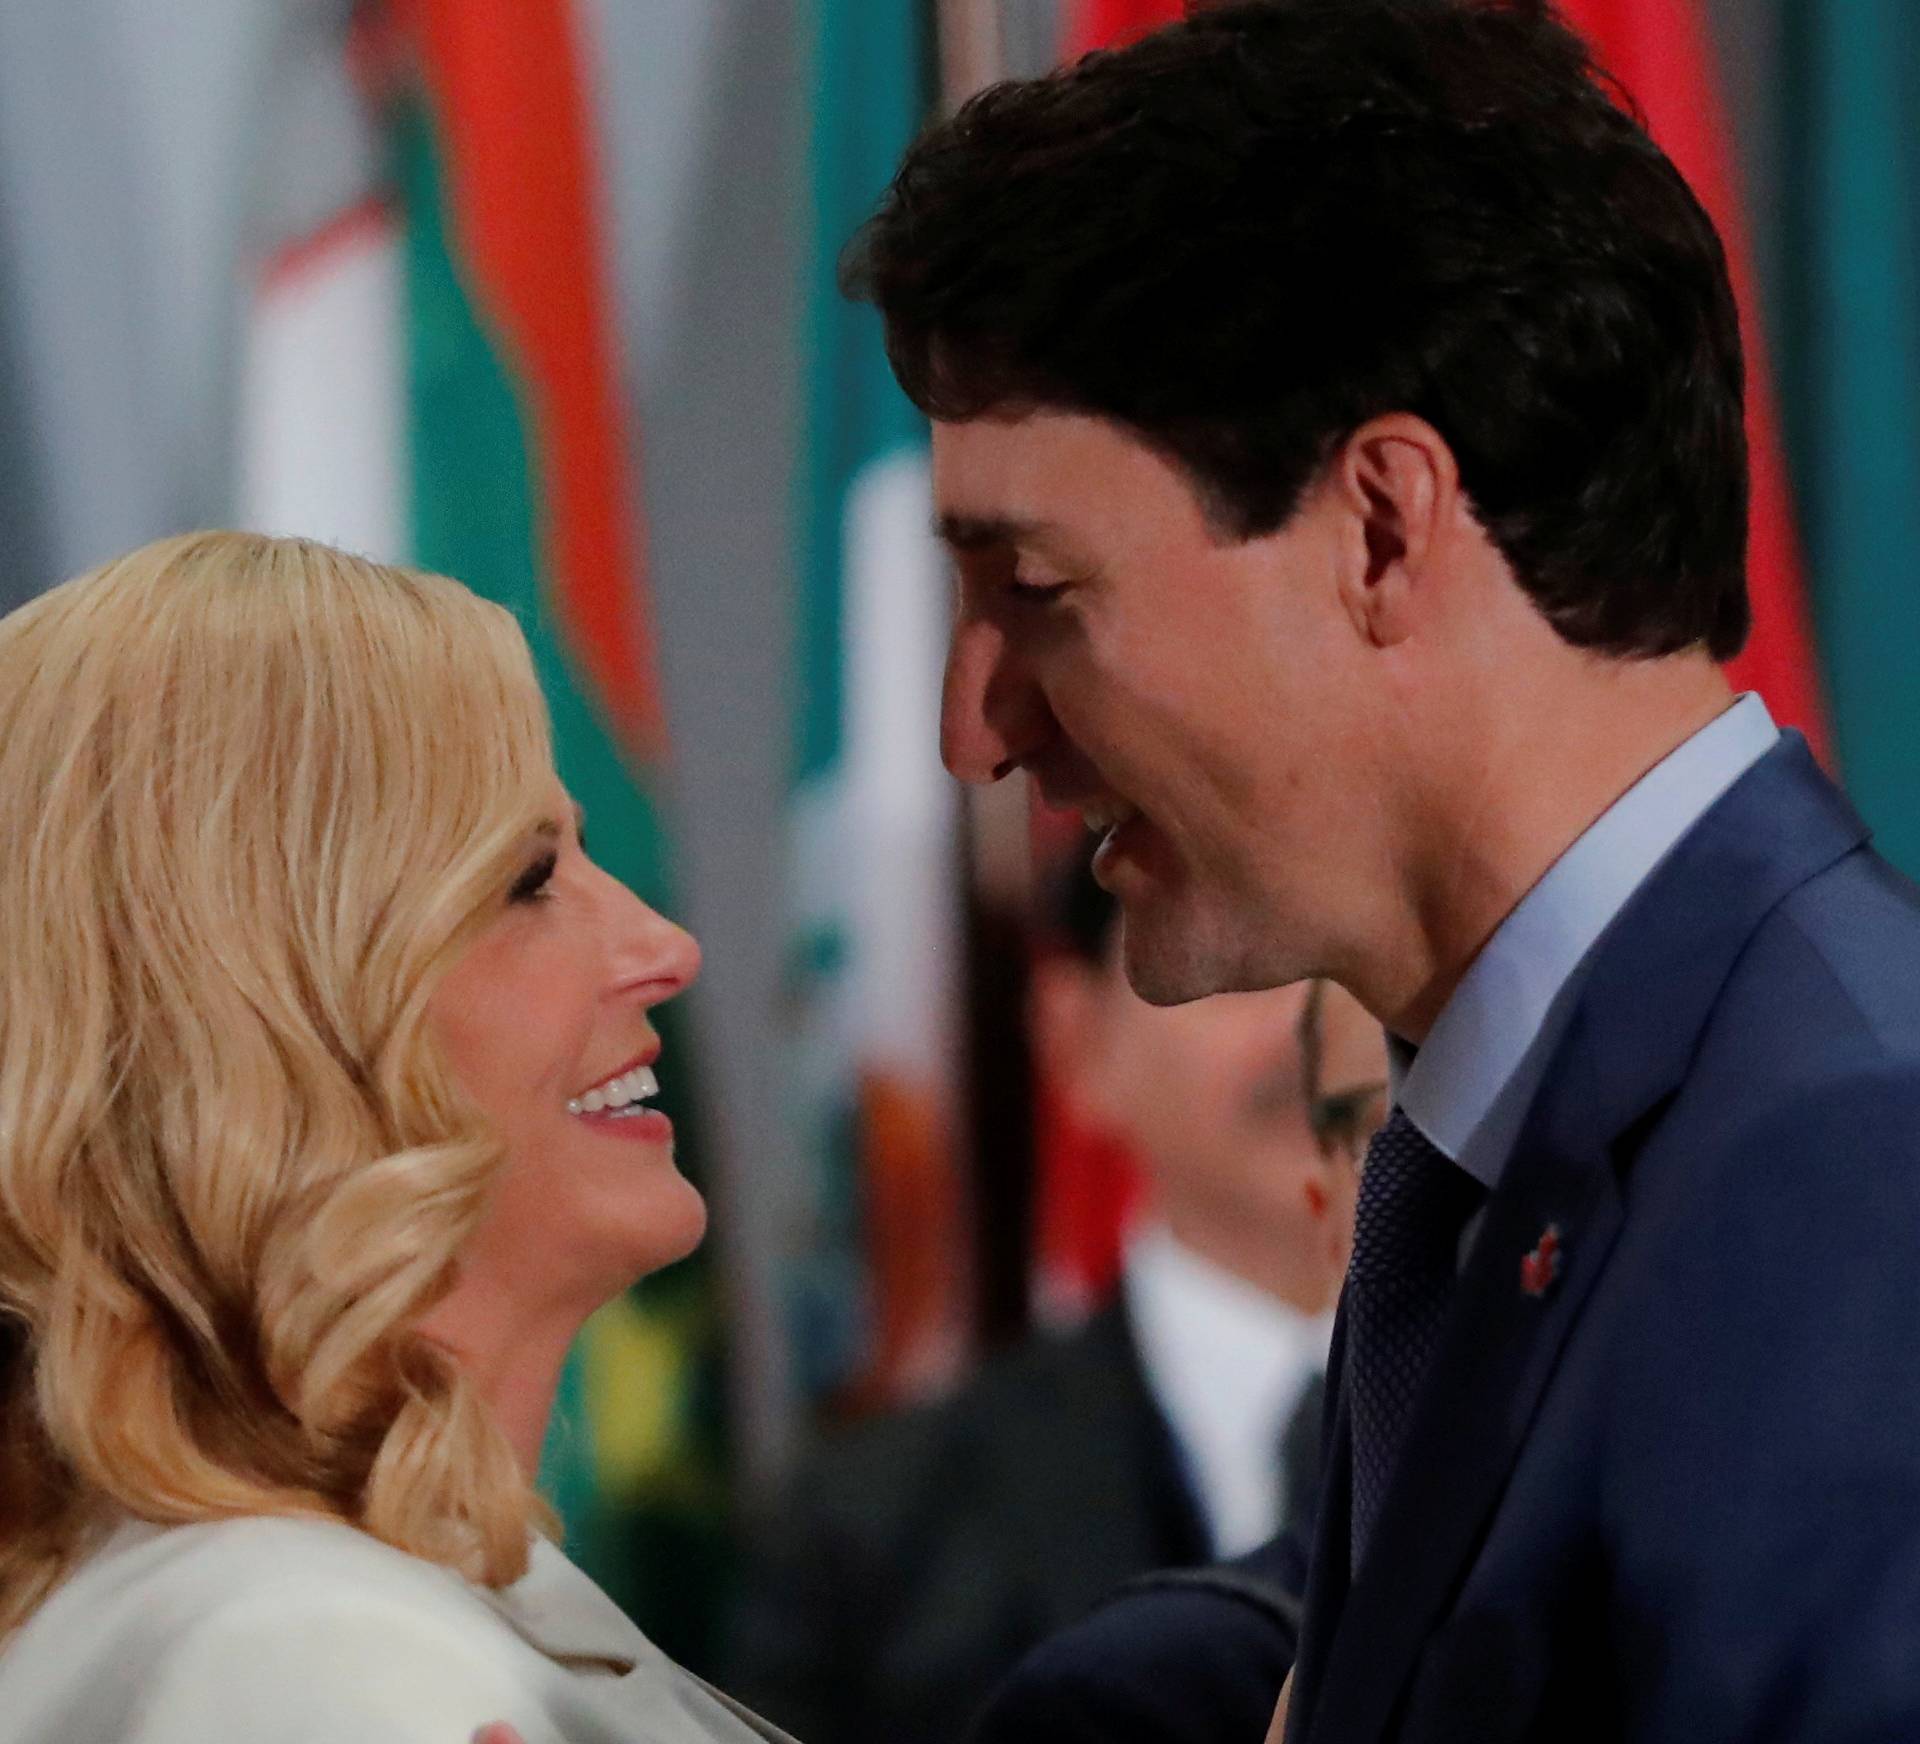 Canadian Prime Minister Trudeau talks with Croatia's President Grabar-Kitarovic during working luncheon at the 73rd session of the United Nations General Assembly at U.N. headquarters in New York